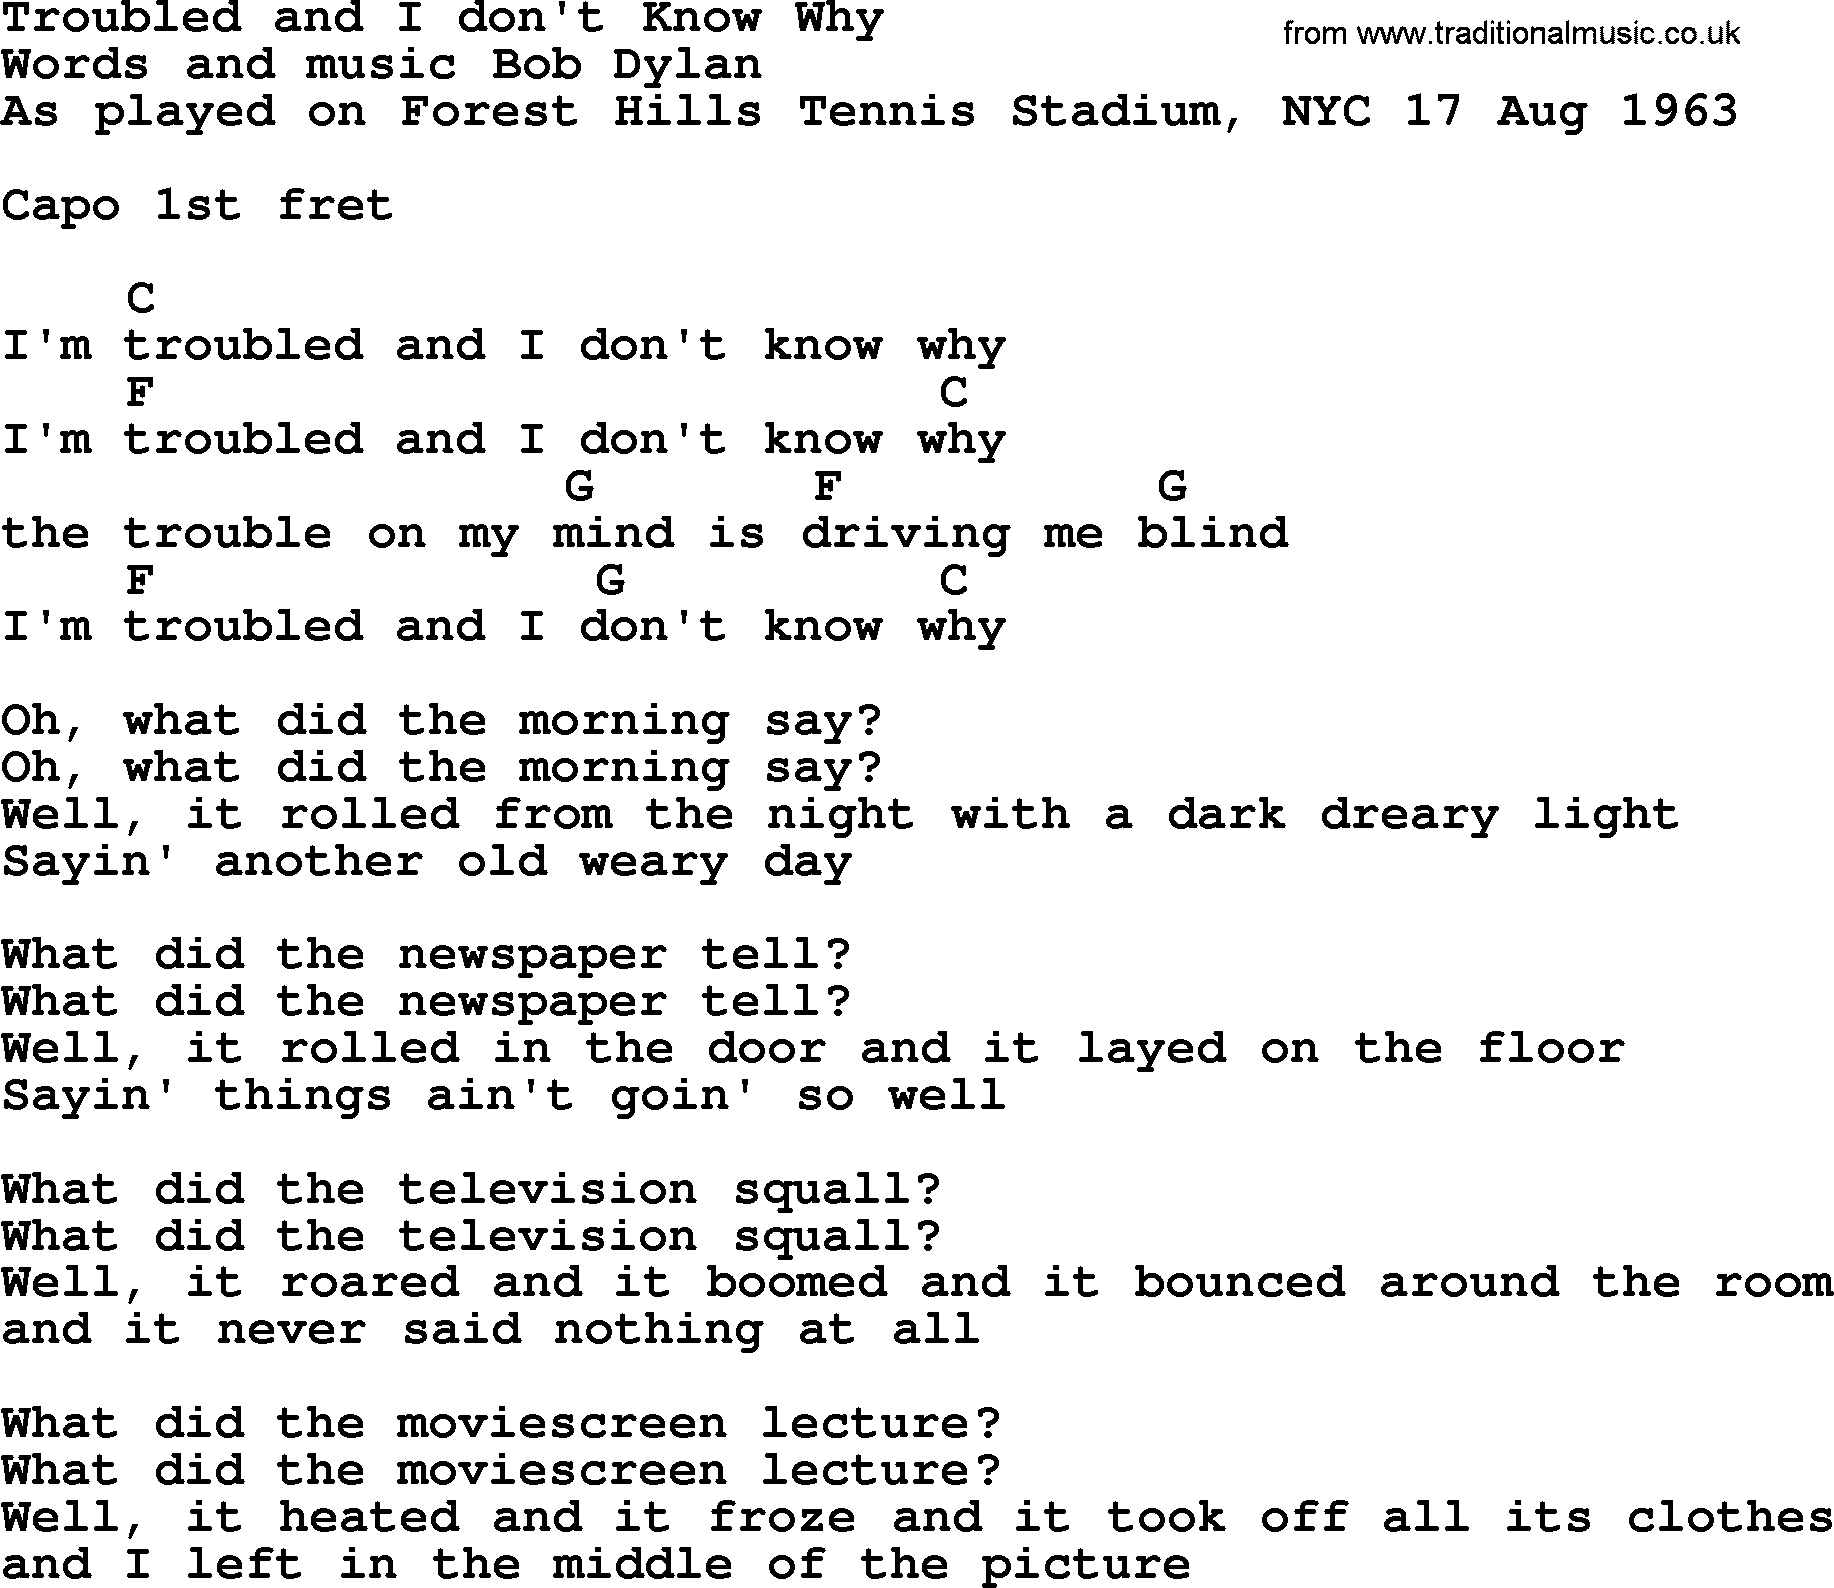 Bob Dylan song, lyrics with chords - Troubled and I don't Know Why